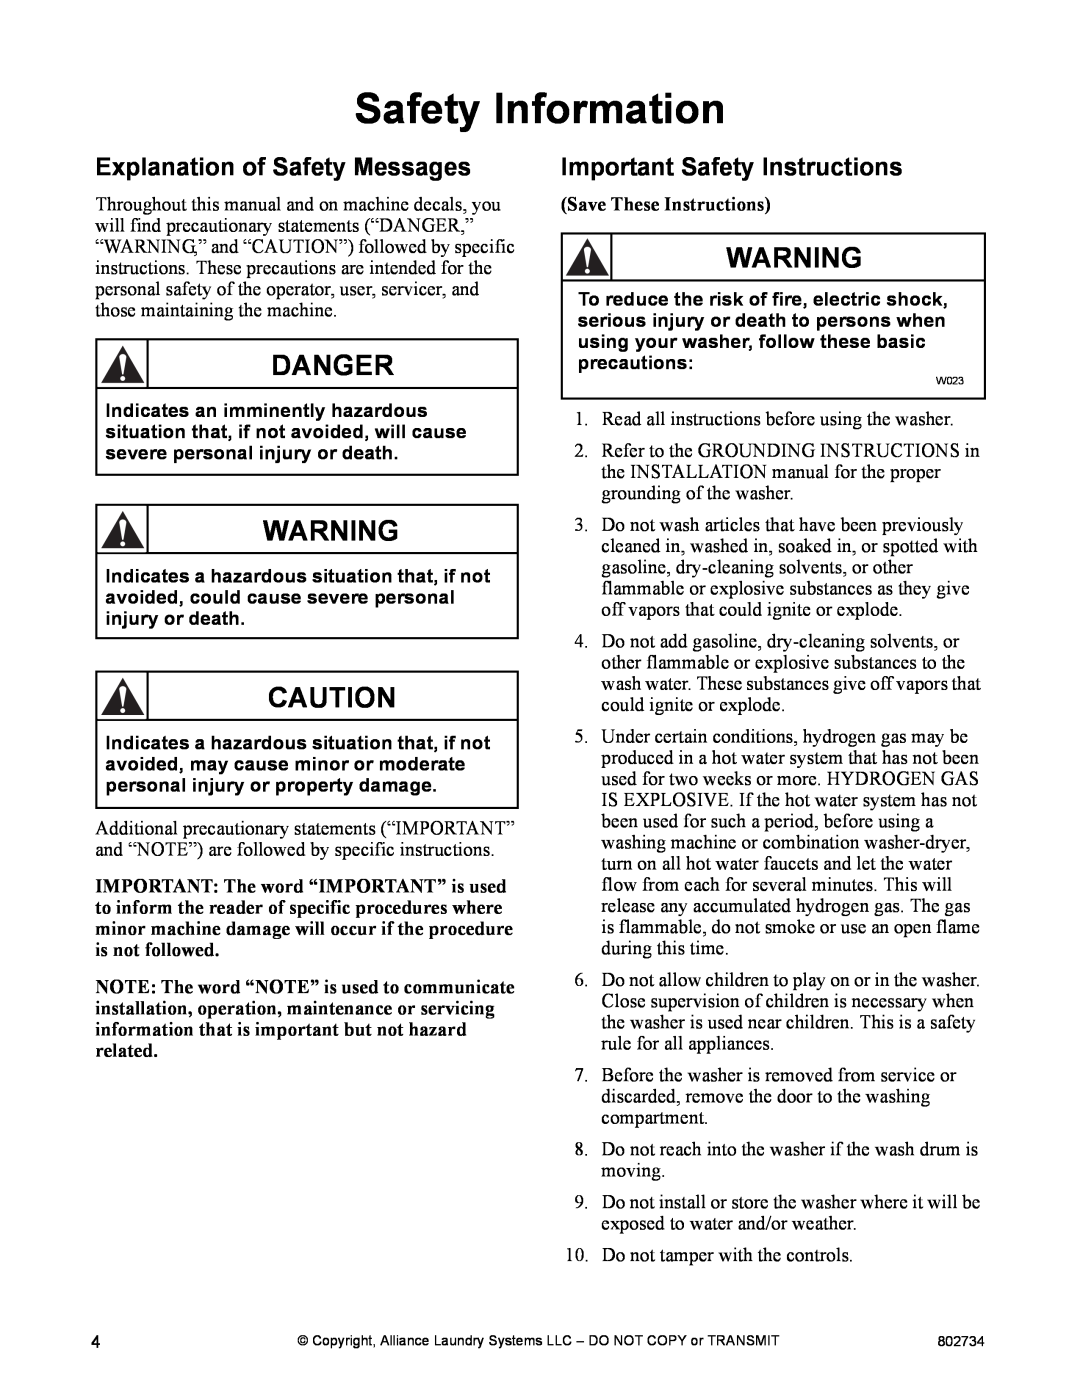 Alliance Laundry Systems FLW1526C manual Safety Information, Explanation of Safety Messages, Important Safety Instructions 